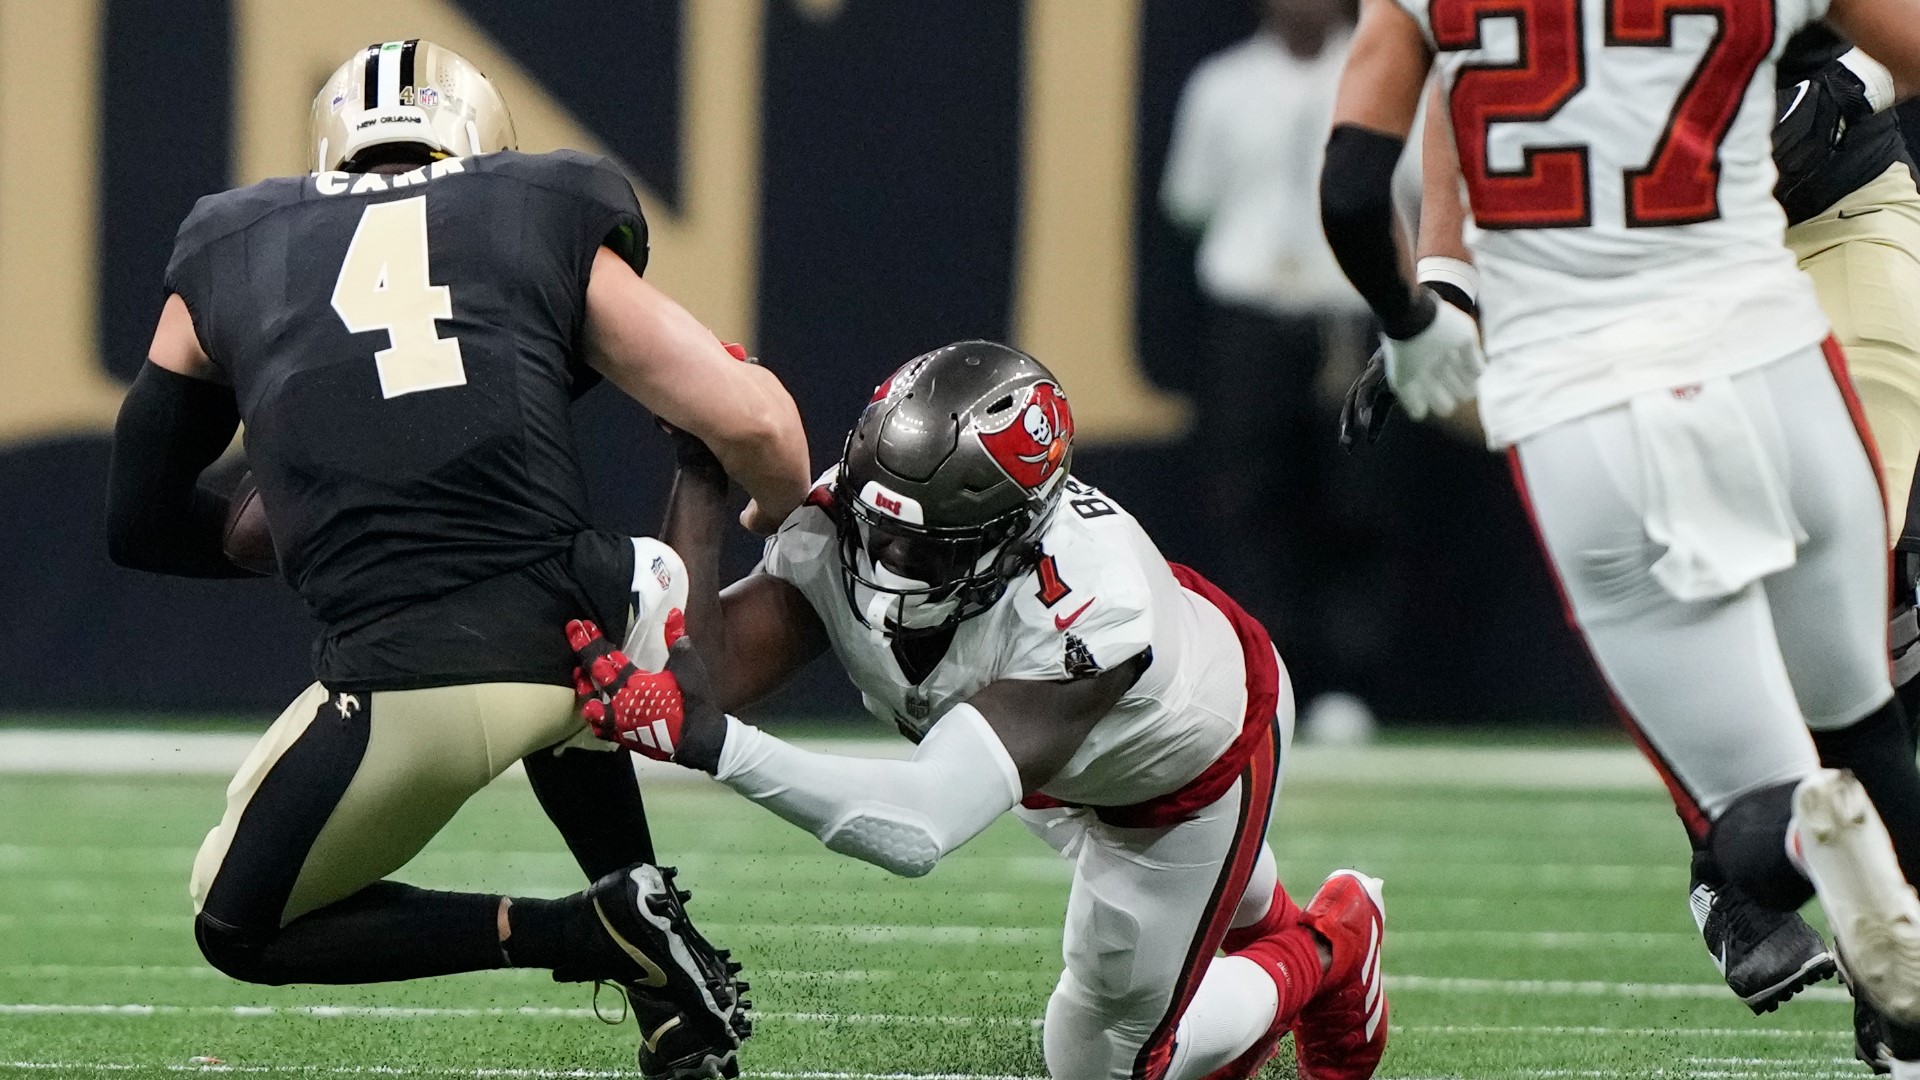 4 Takeaways: Saints ugly loss to the Buccaneers